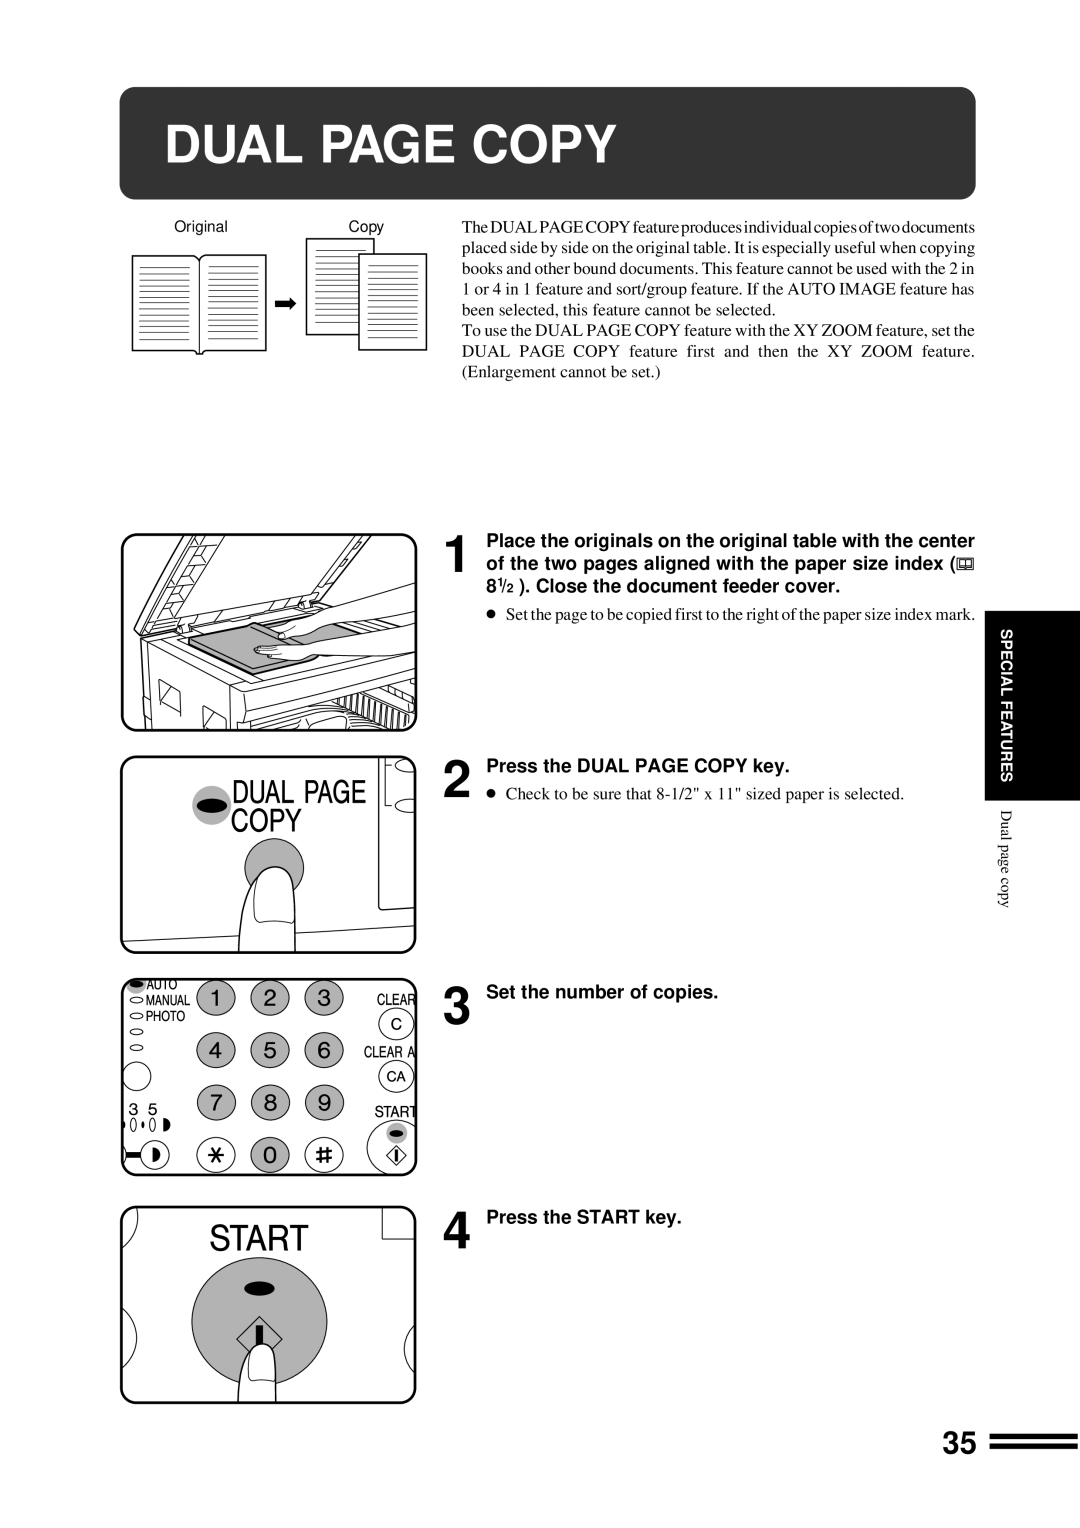 Sharp AR-207 operation manual Dual Page Copy, Press the DUAL PAGE COPY key, Set the number of copies Press the START key 